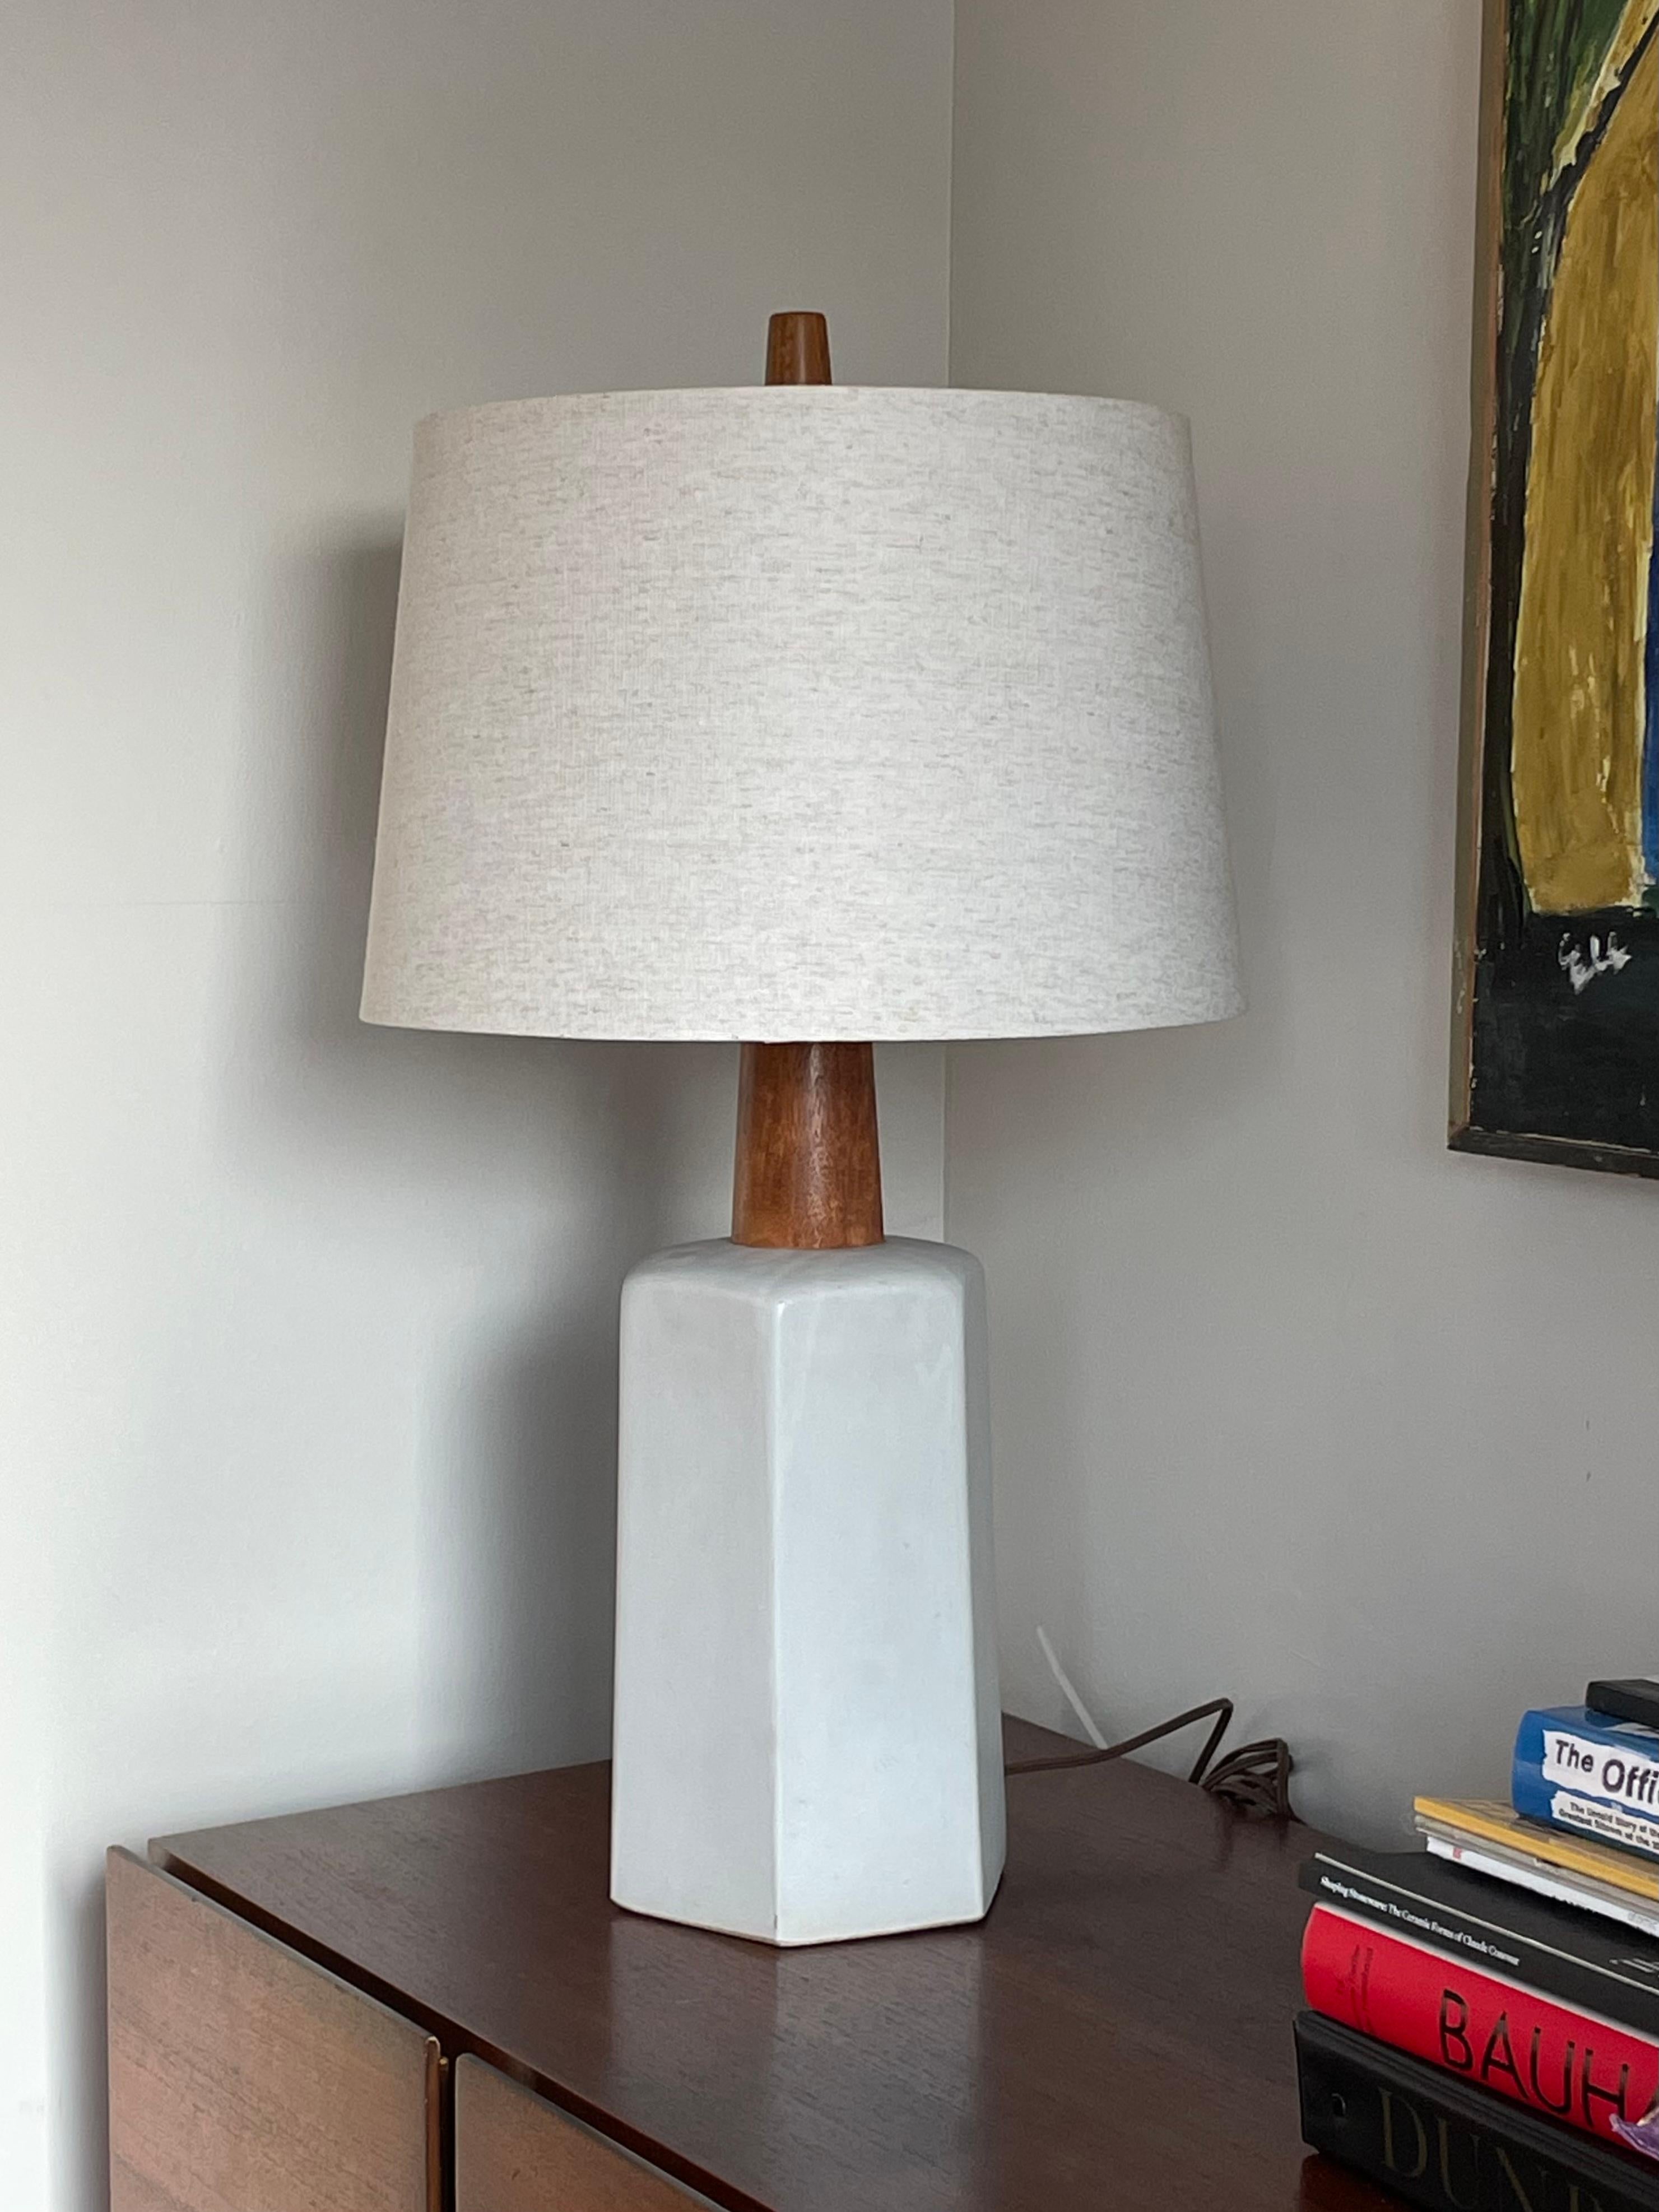 Wonderful minimalist table lamp in ceramic by famed ceramicist duo Jane and Gordon Martz for Marshall Studios. Features a ceramic hexagon base accentuated with a thick walnut neck and finial. Color is an off white which appears almost light grey in